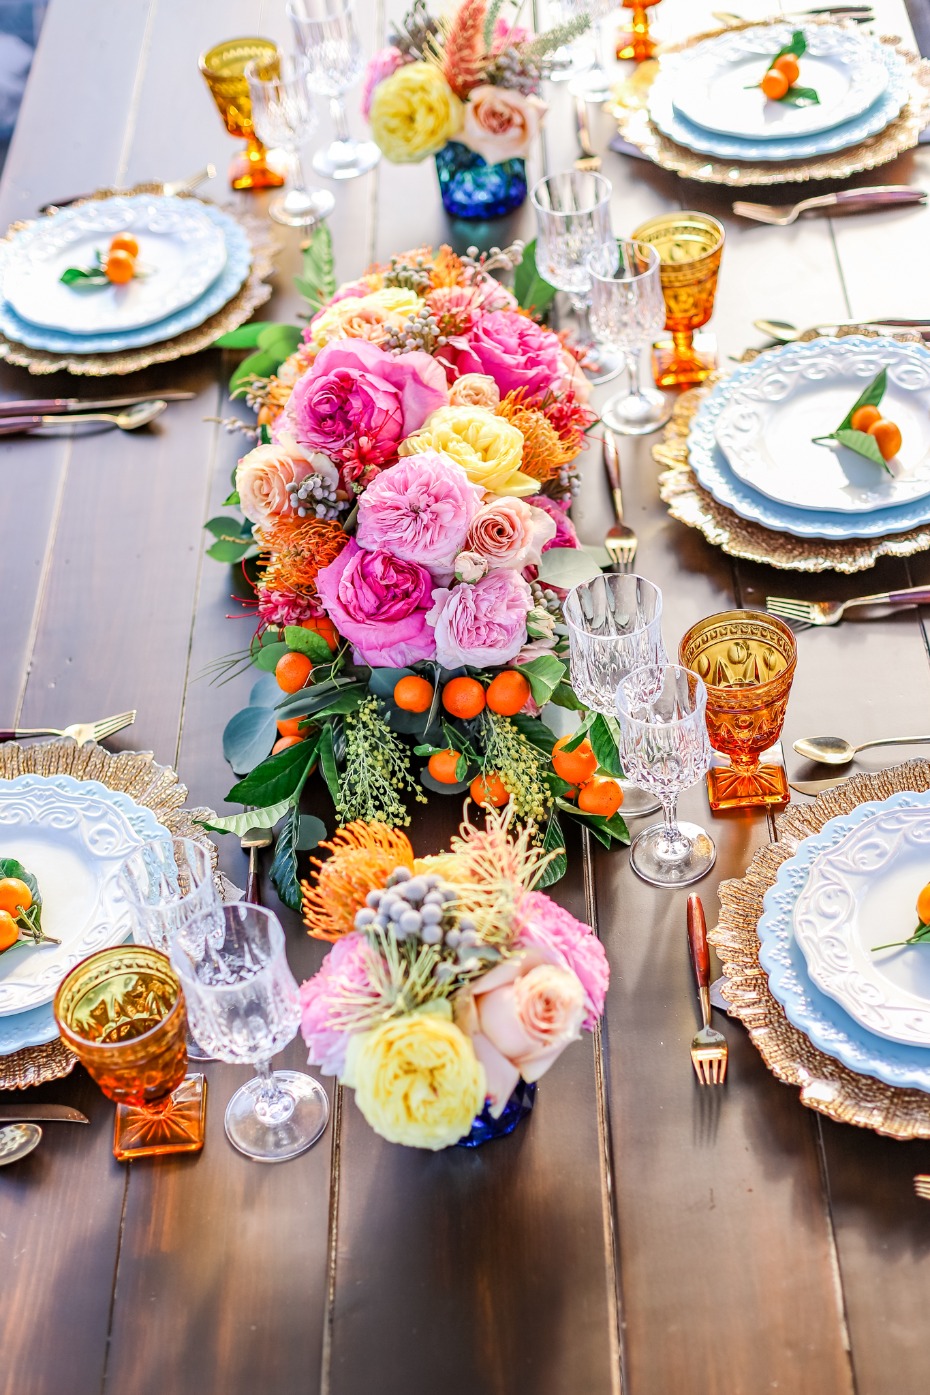 Fresh and bright table decor with local fruits